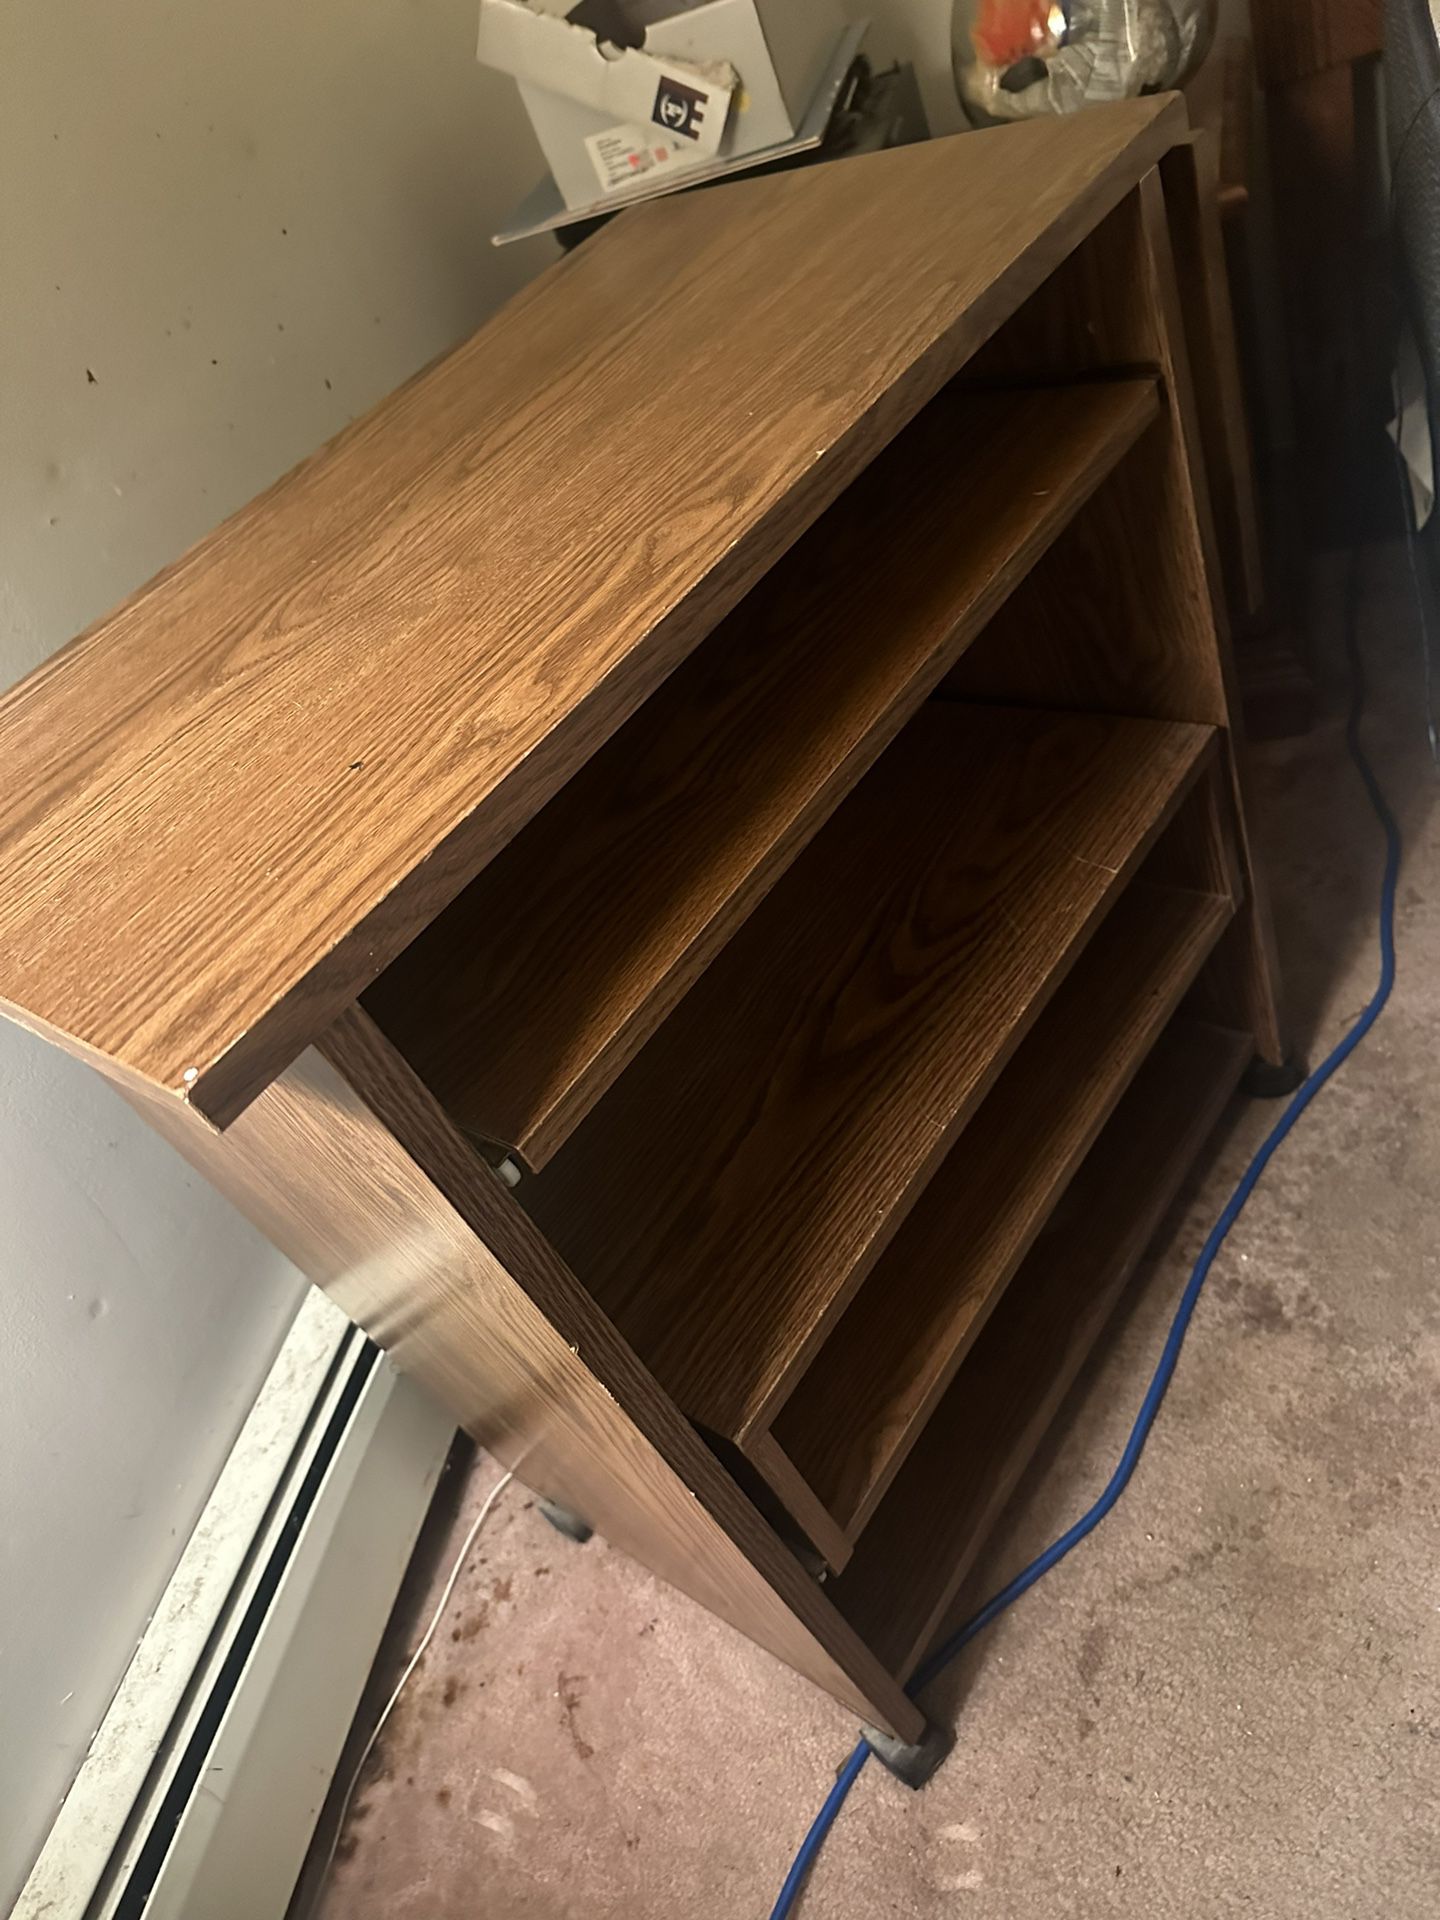 Solid Wood Shelf With Pull Out Shelfs And Wheels, With Side Dresser Both For Only $20!!! 